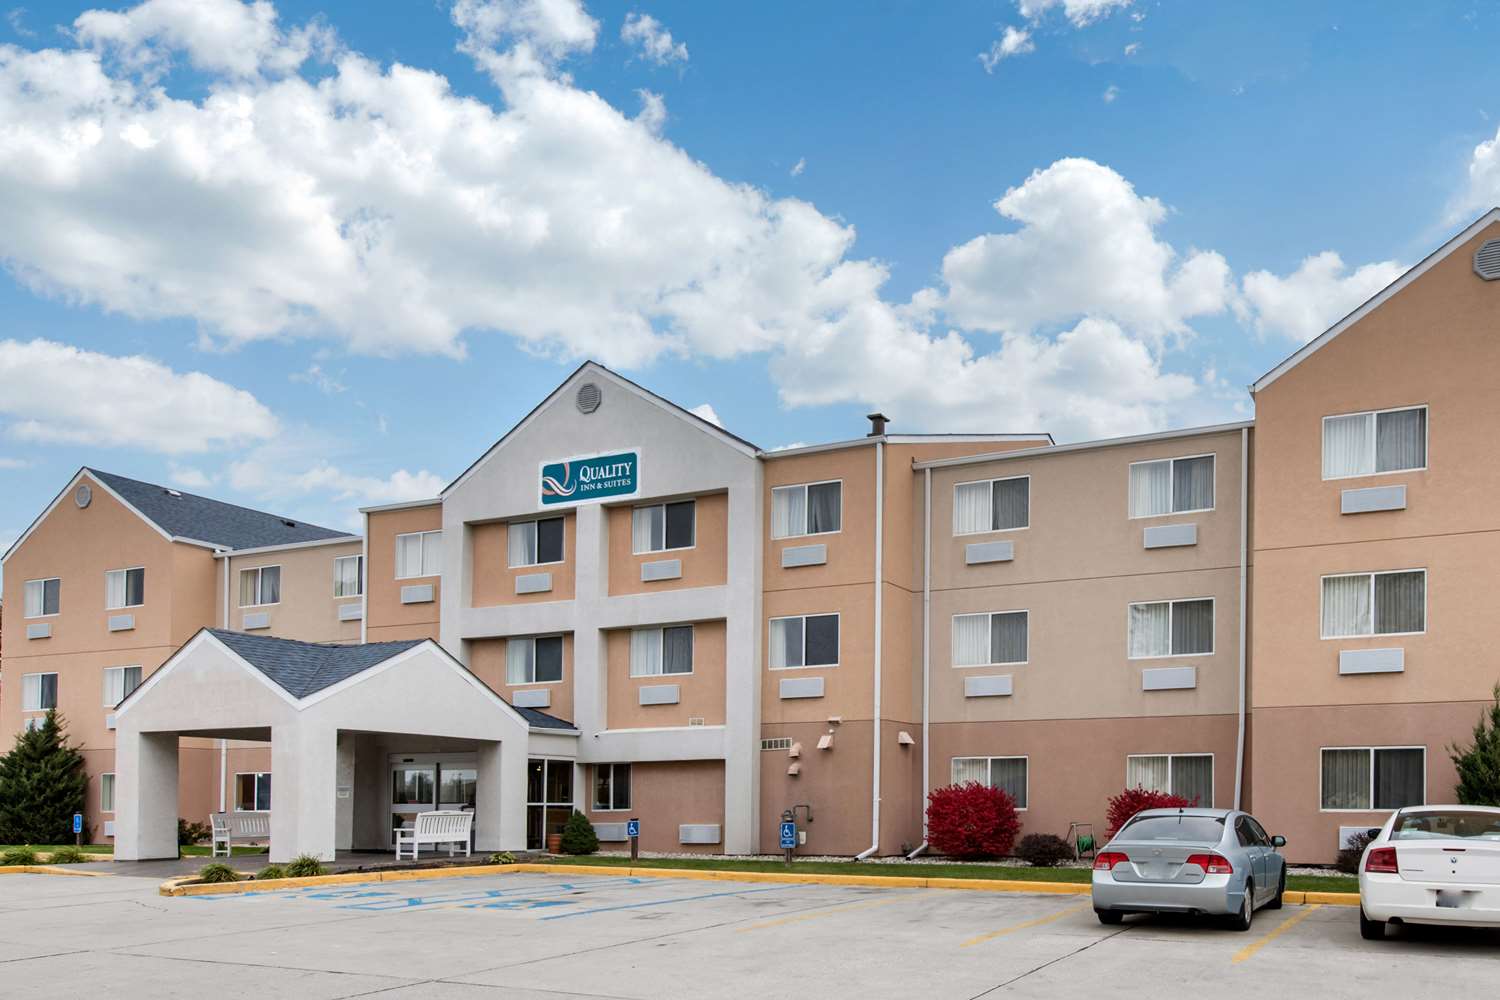 Pet Friendly Quality Inn and Suites in Kokomo, Indiana